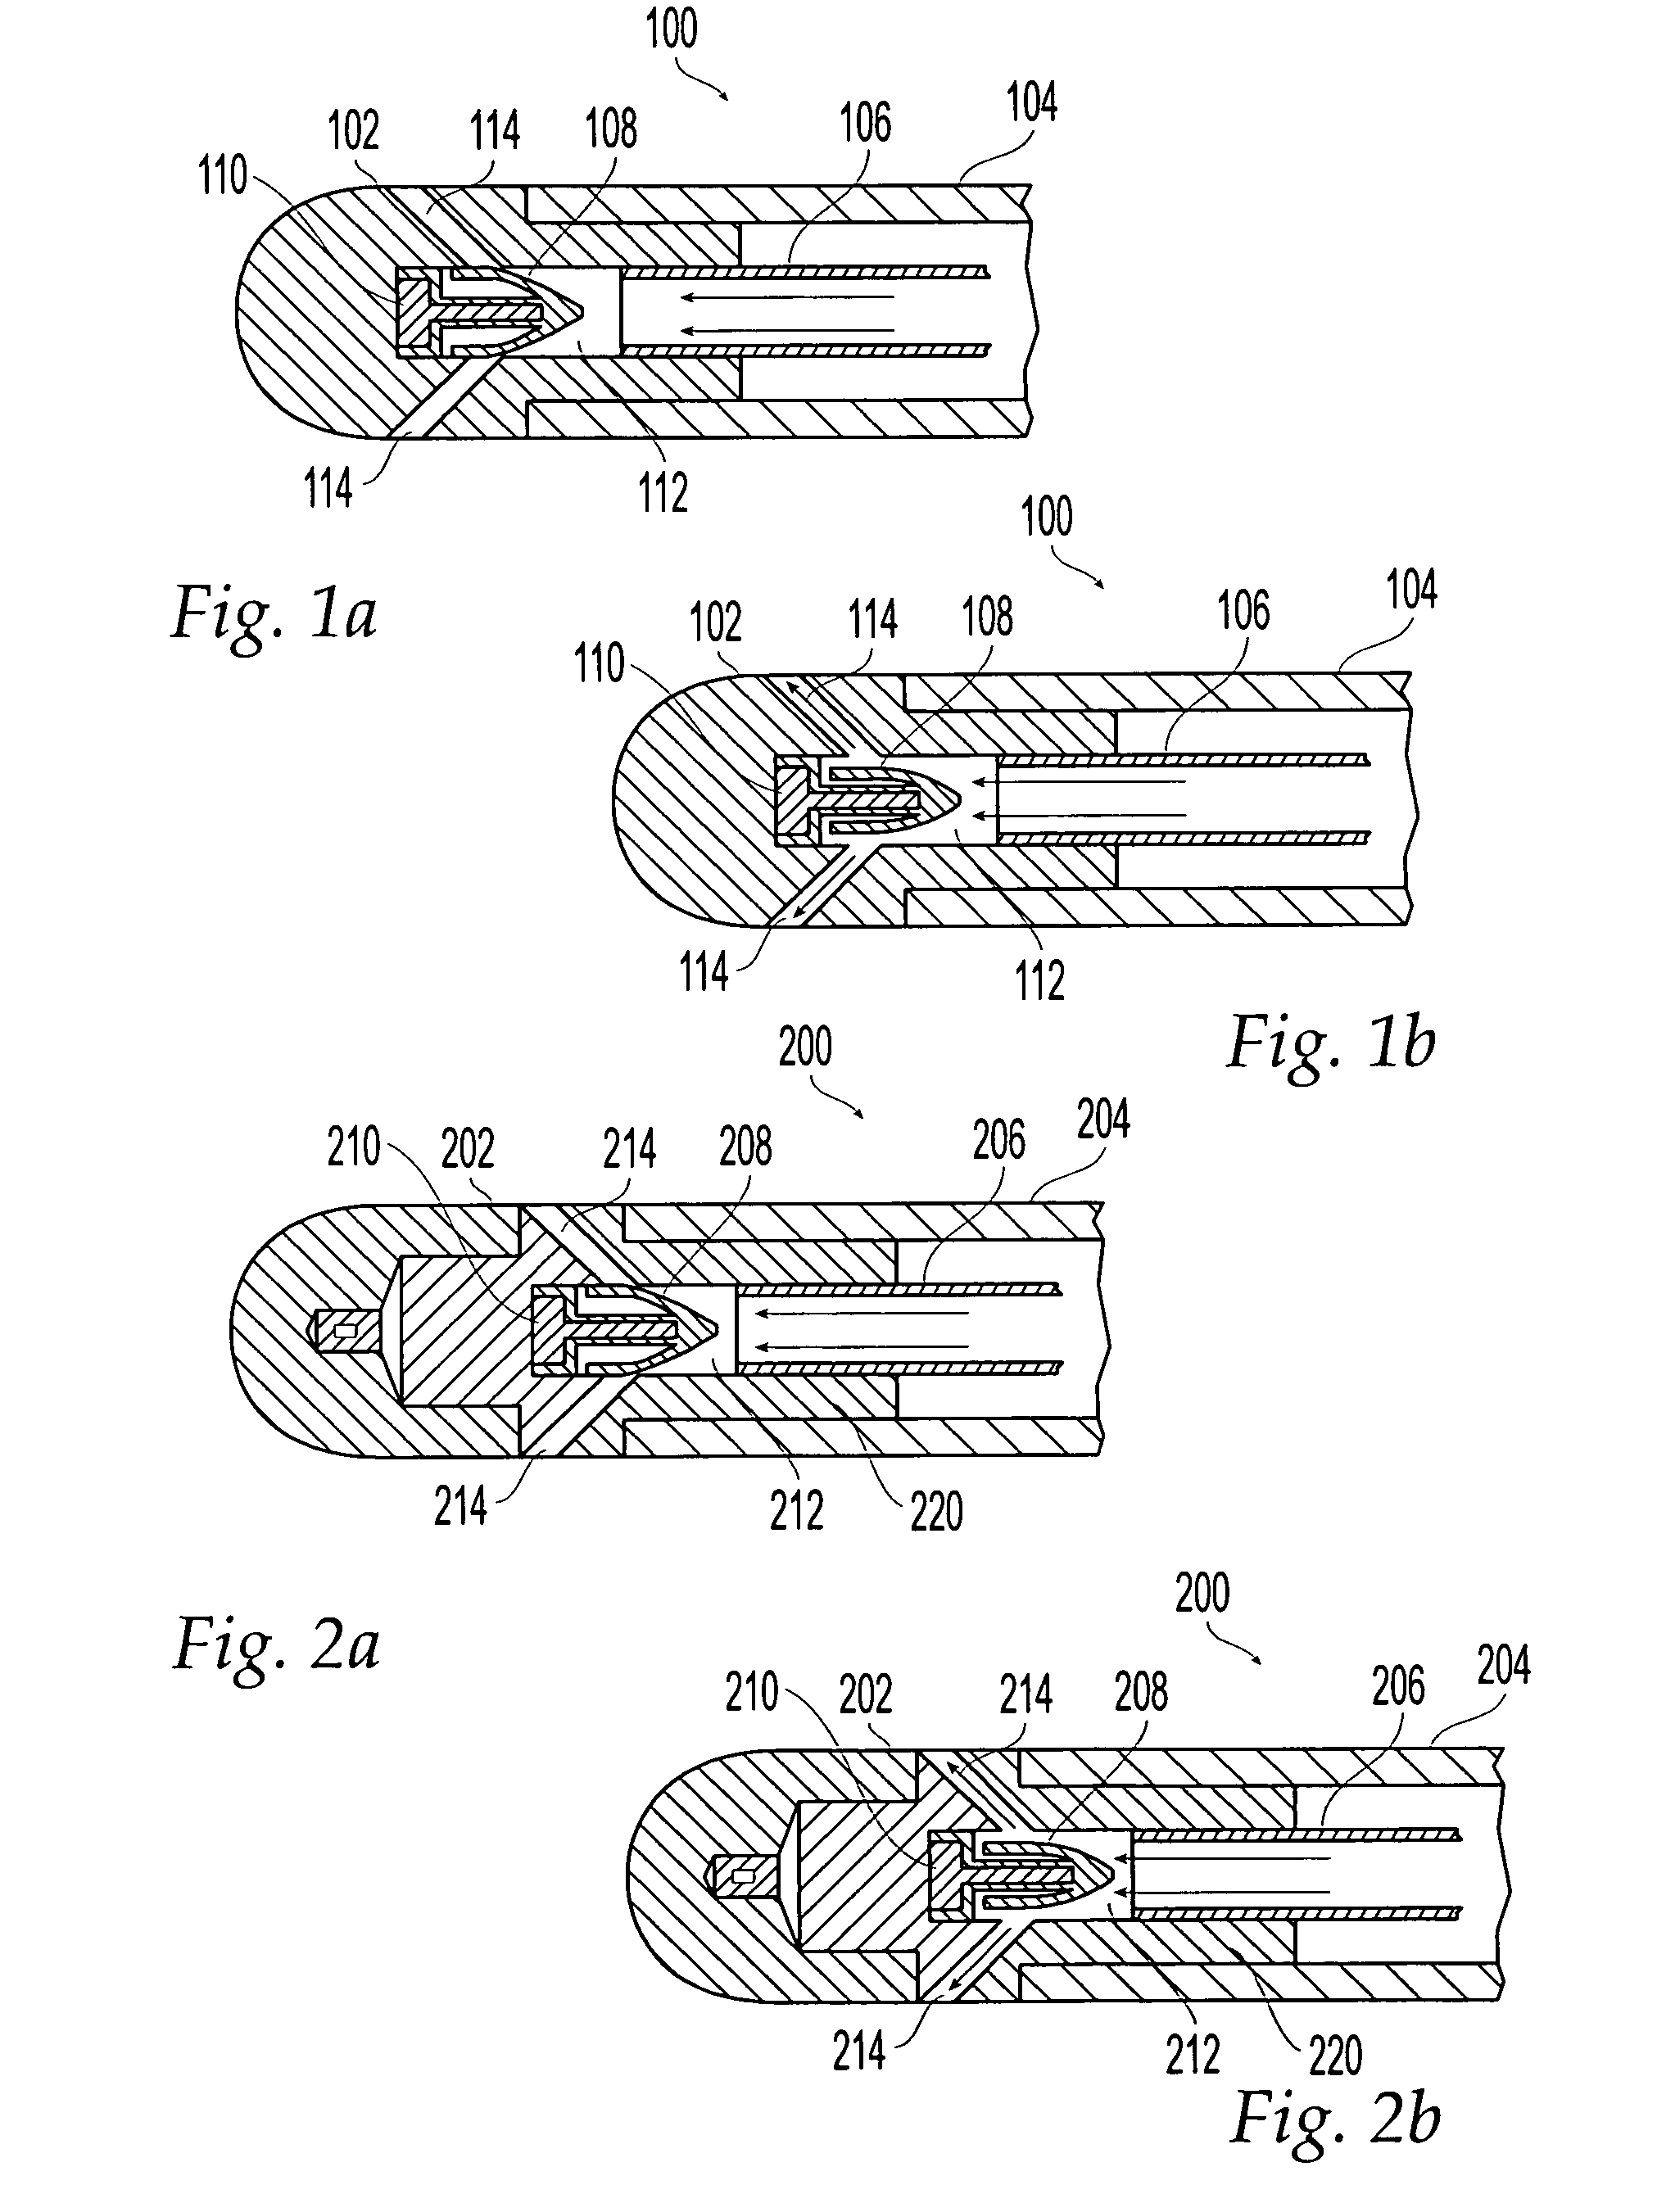 Irrigated ablation catheter system with pulsatile flow to prevent thrombus